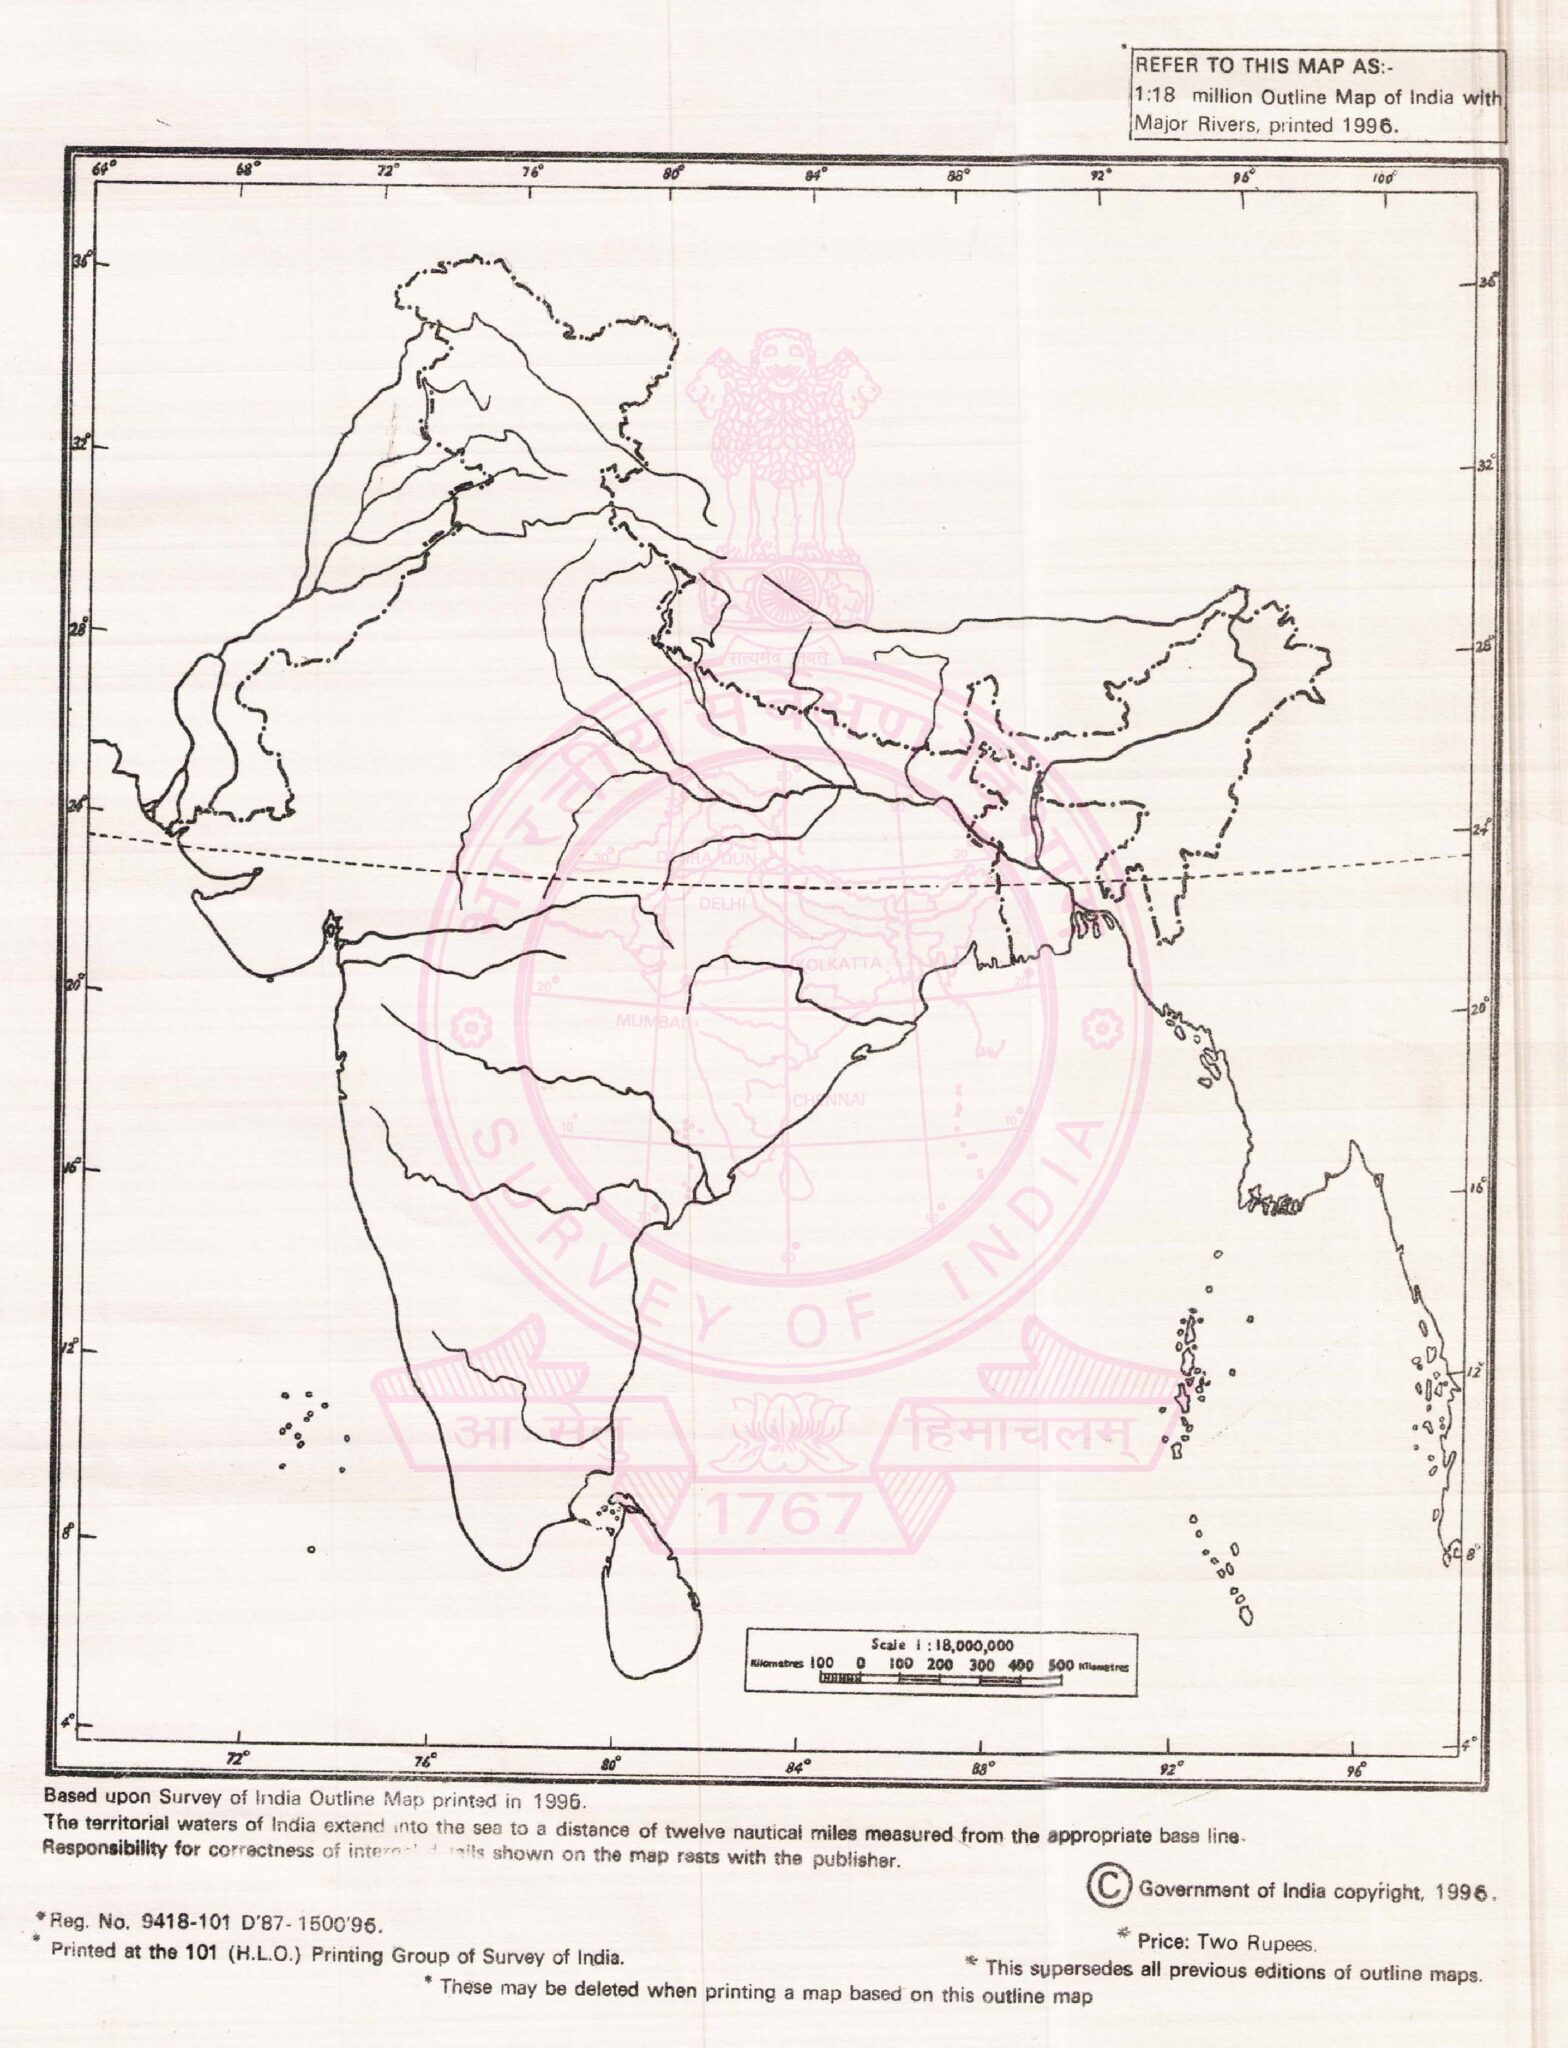 India River Map of India's Rivers System